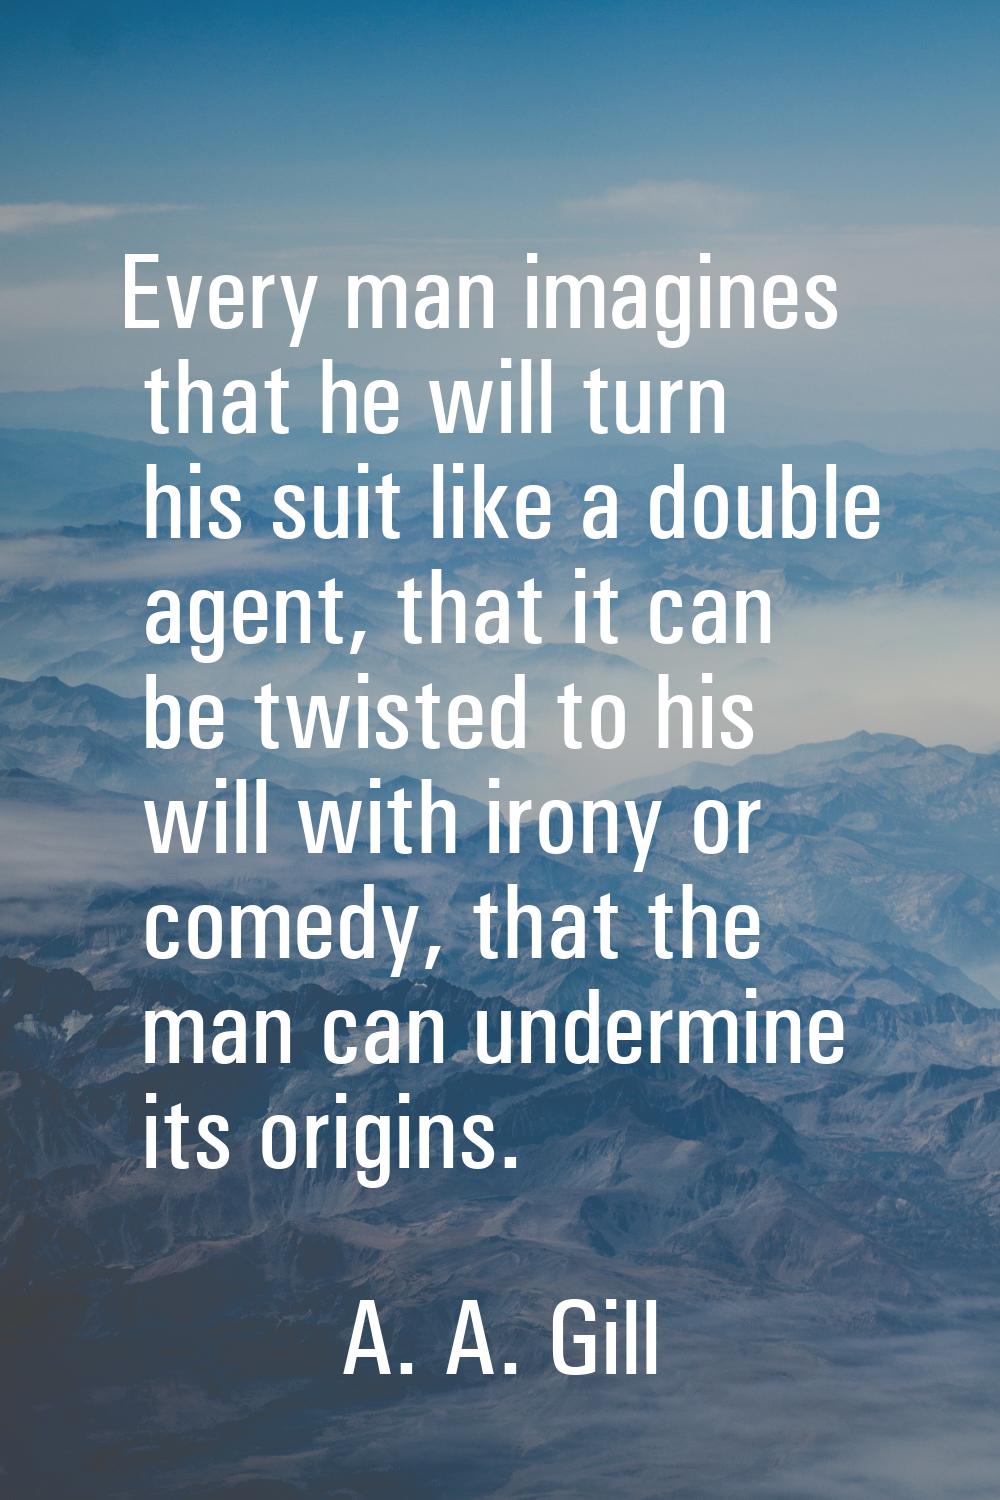 Every man imagines that he will turn his suit like a double agent, that it can be twisted to his wi